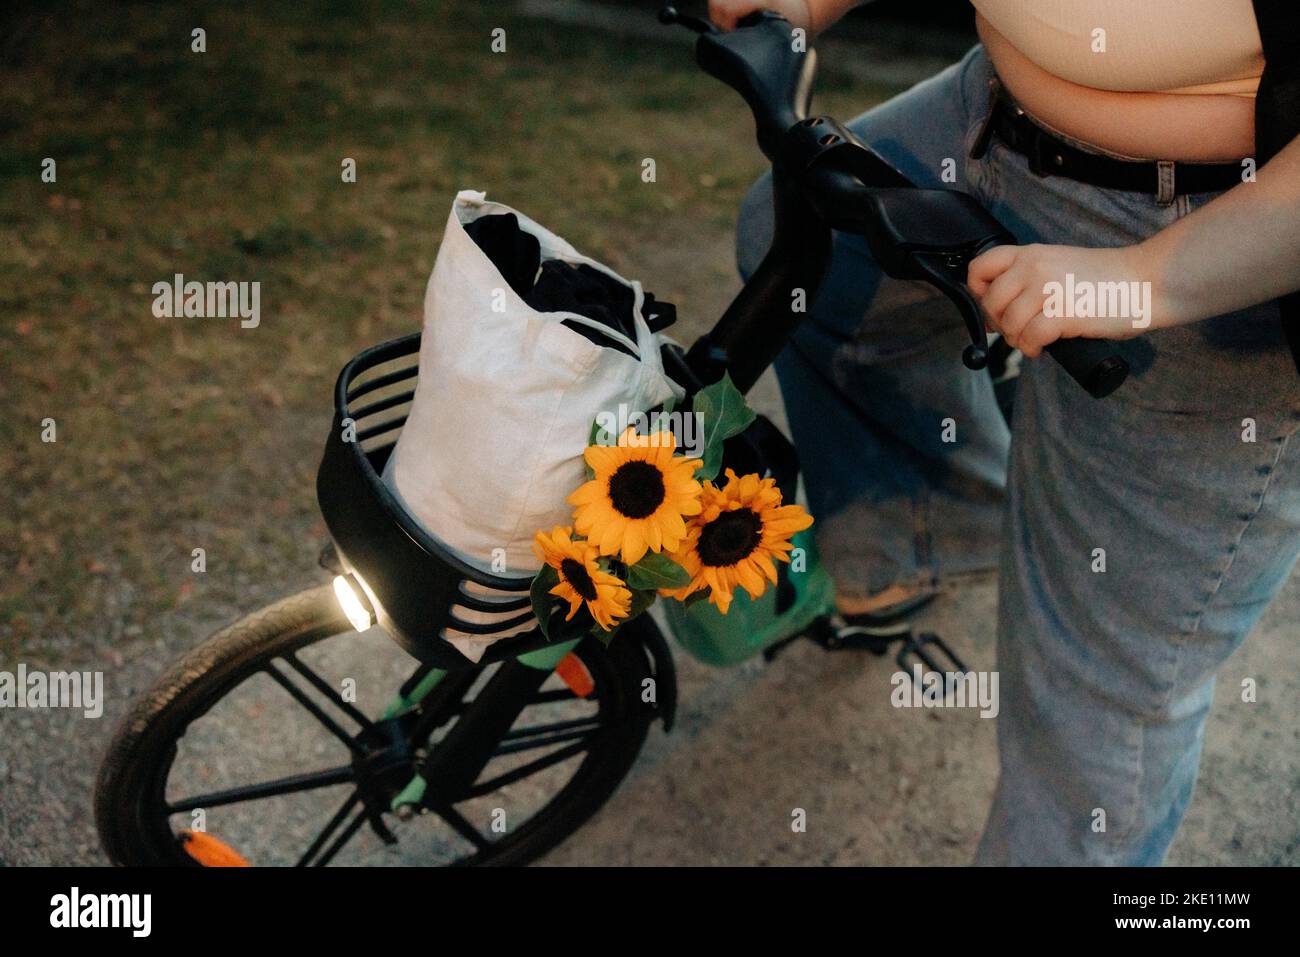 Low section of young woman by bicycle with reusable bag and sunflowers Stock Photo